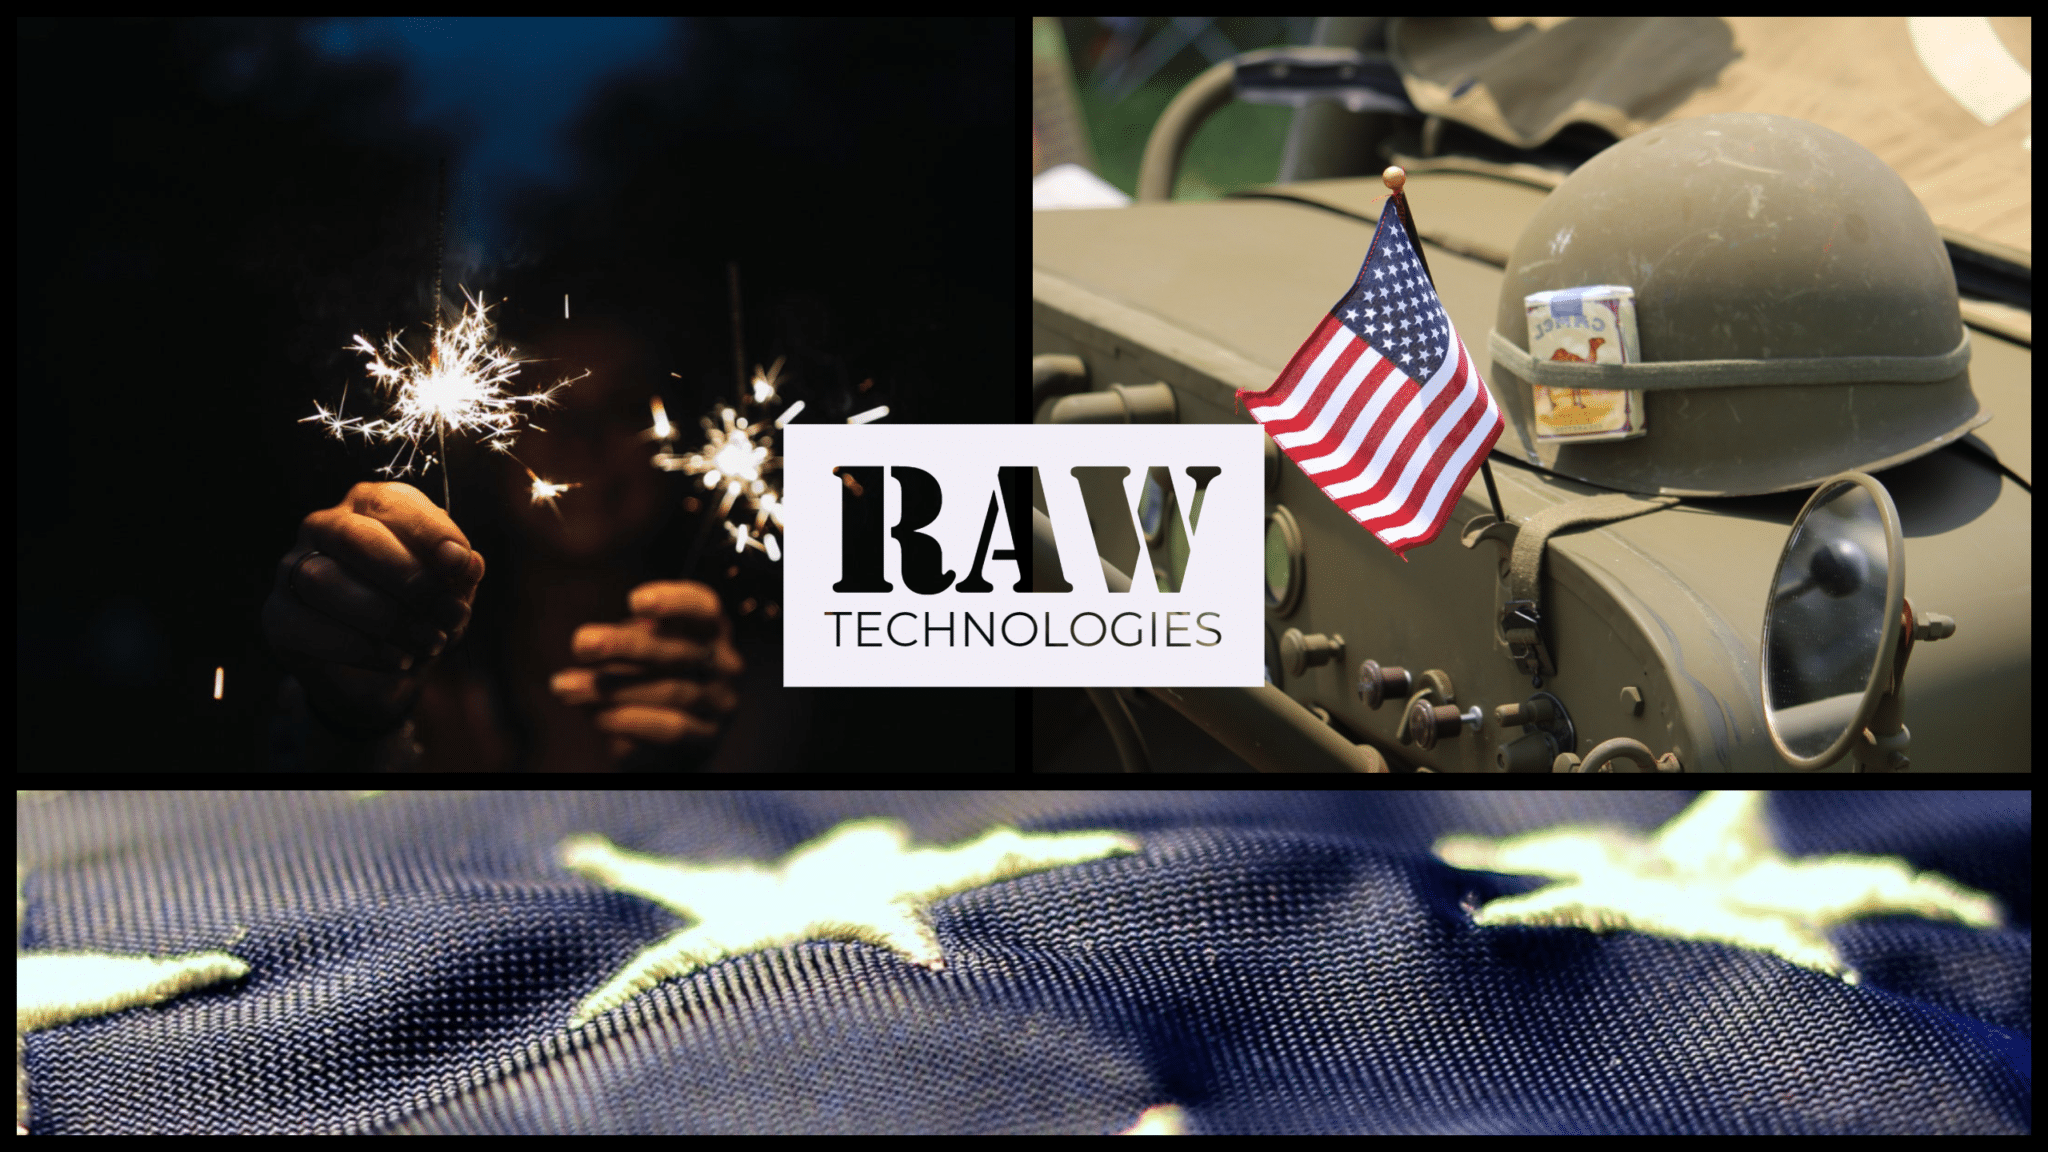 RAW Technologies | 4th of July Launch Cover | American Patriotism Sparklers, Military Jeep and Helmet with American Flag Stars